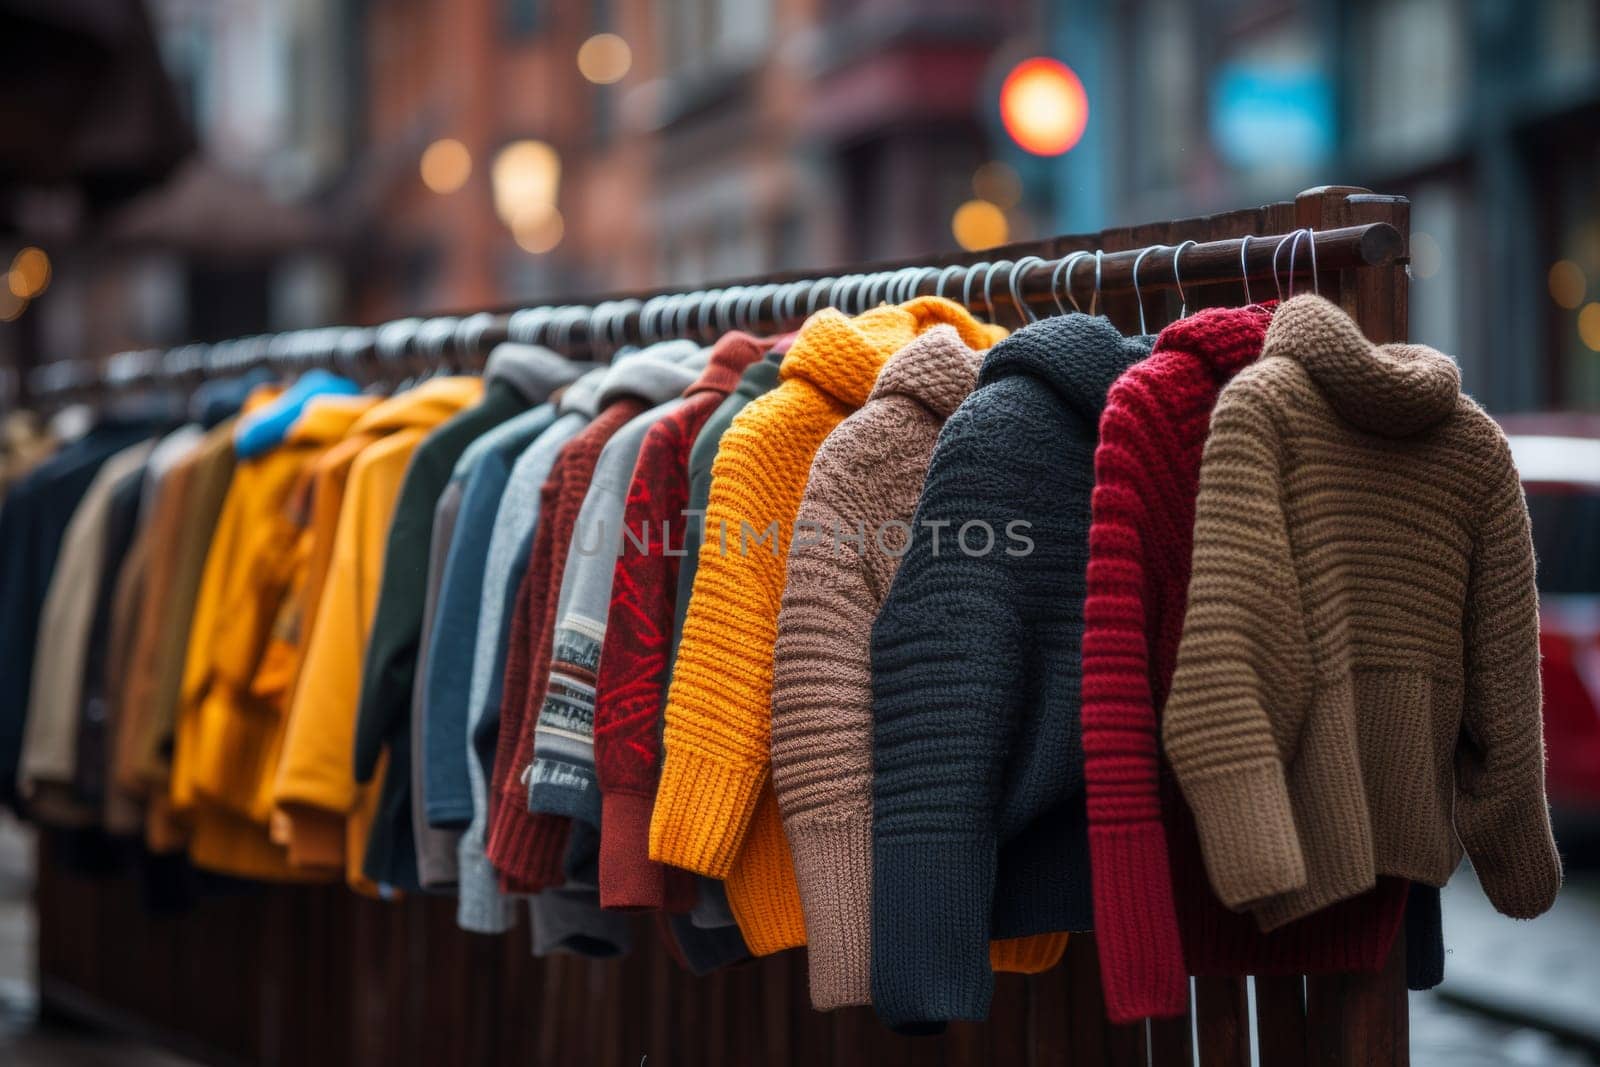 Outdoor street market clothing rack with variety of clothes for sale in busy city center marketplace